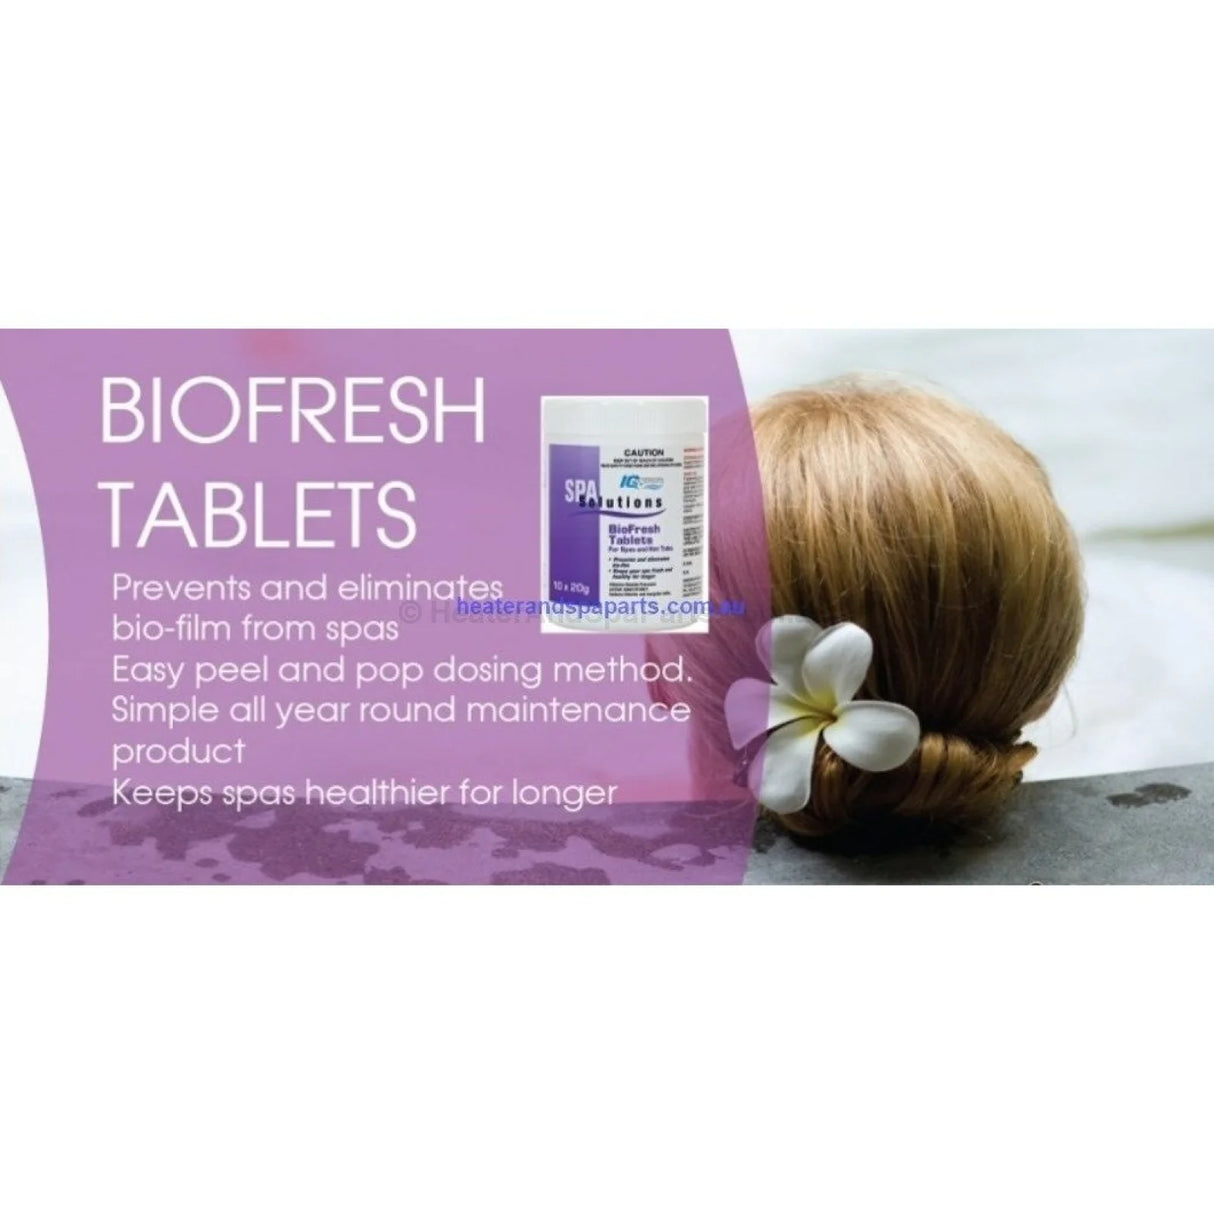 Biofresh Tablets 10x 20g Tablets - for Spas - Heater and Spa Parts